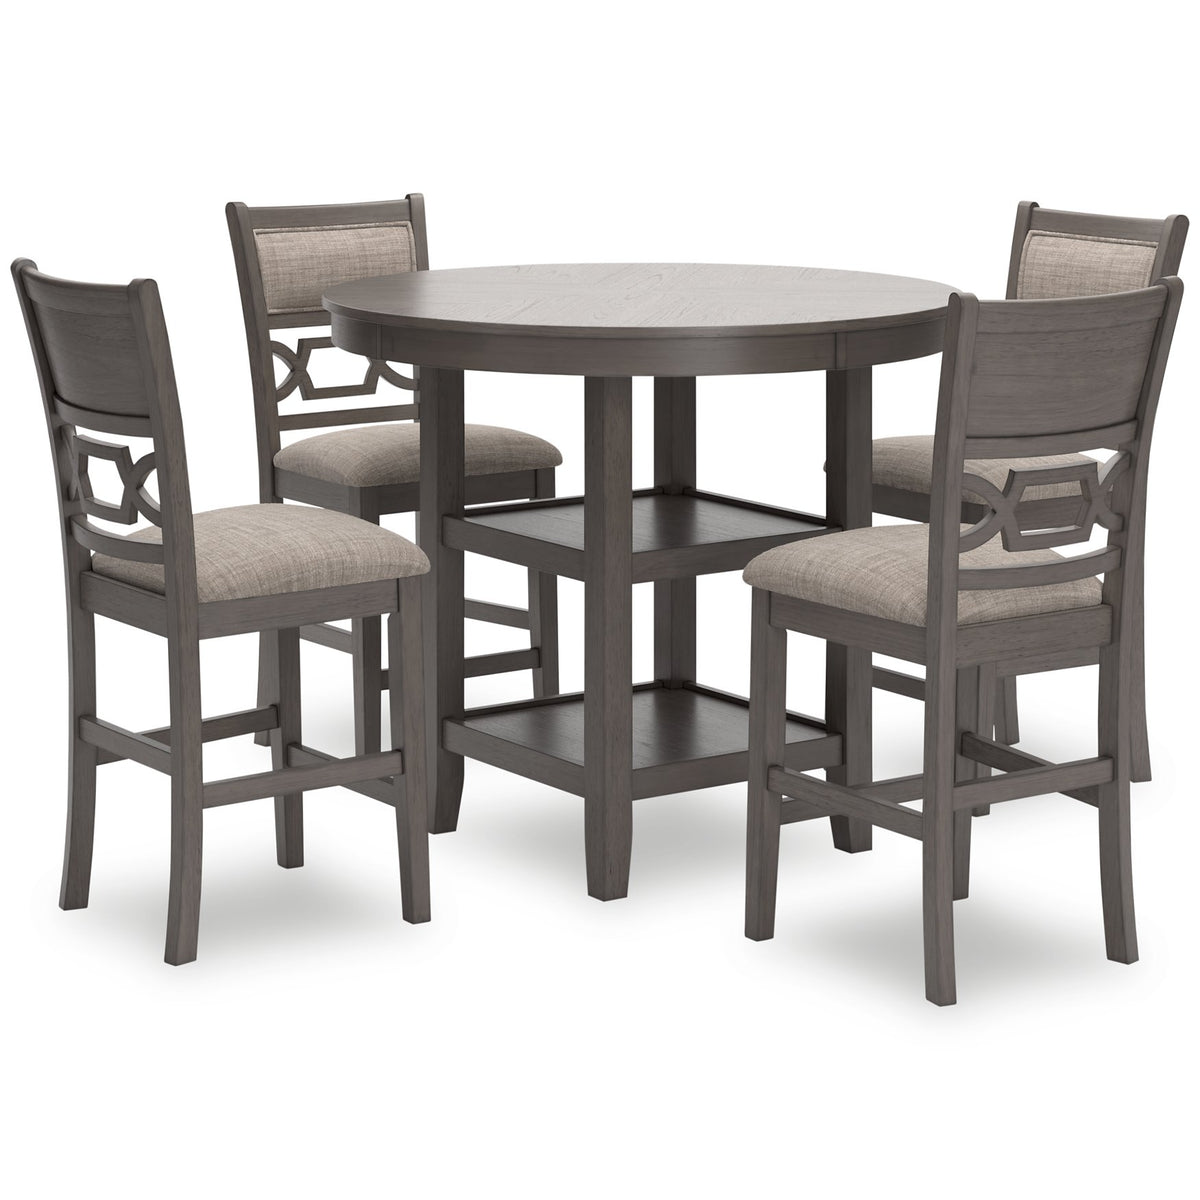 Wrenning Counter Height Dining Table and 4 Barstools (Set of 5)  Half Price Furniture